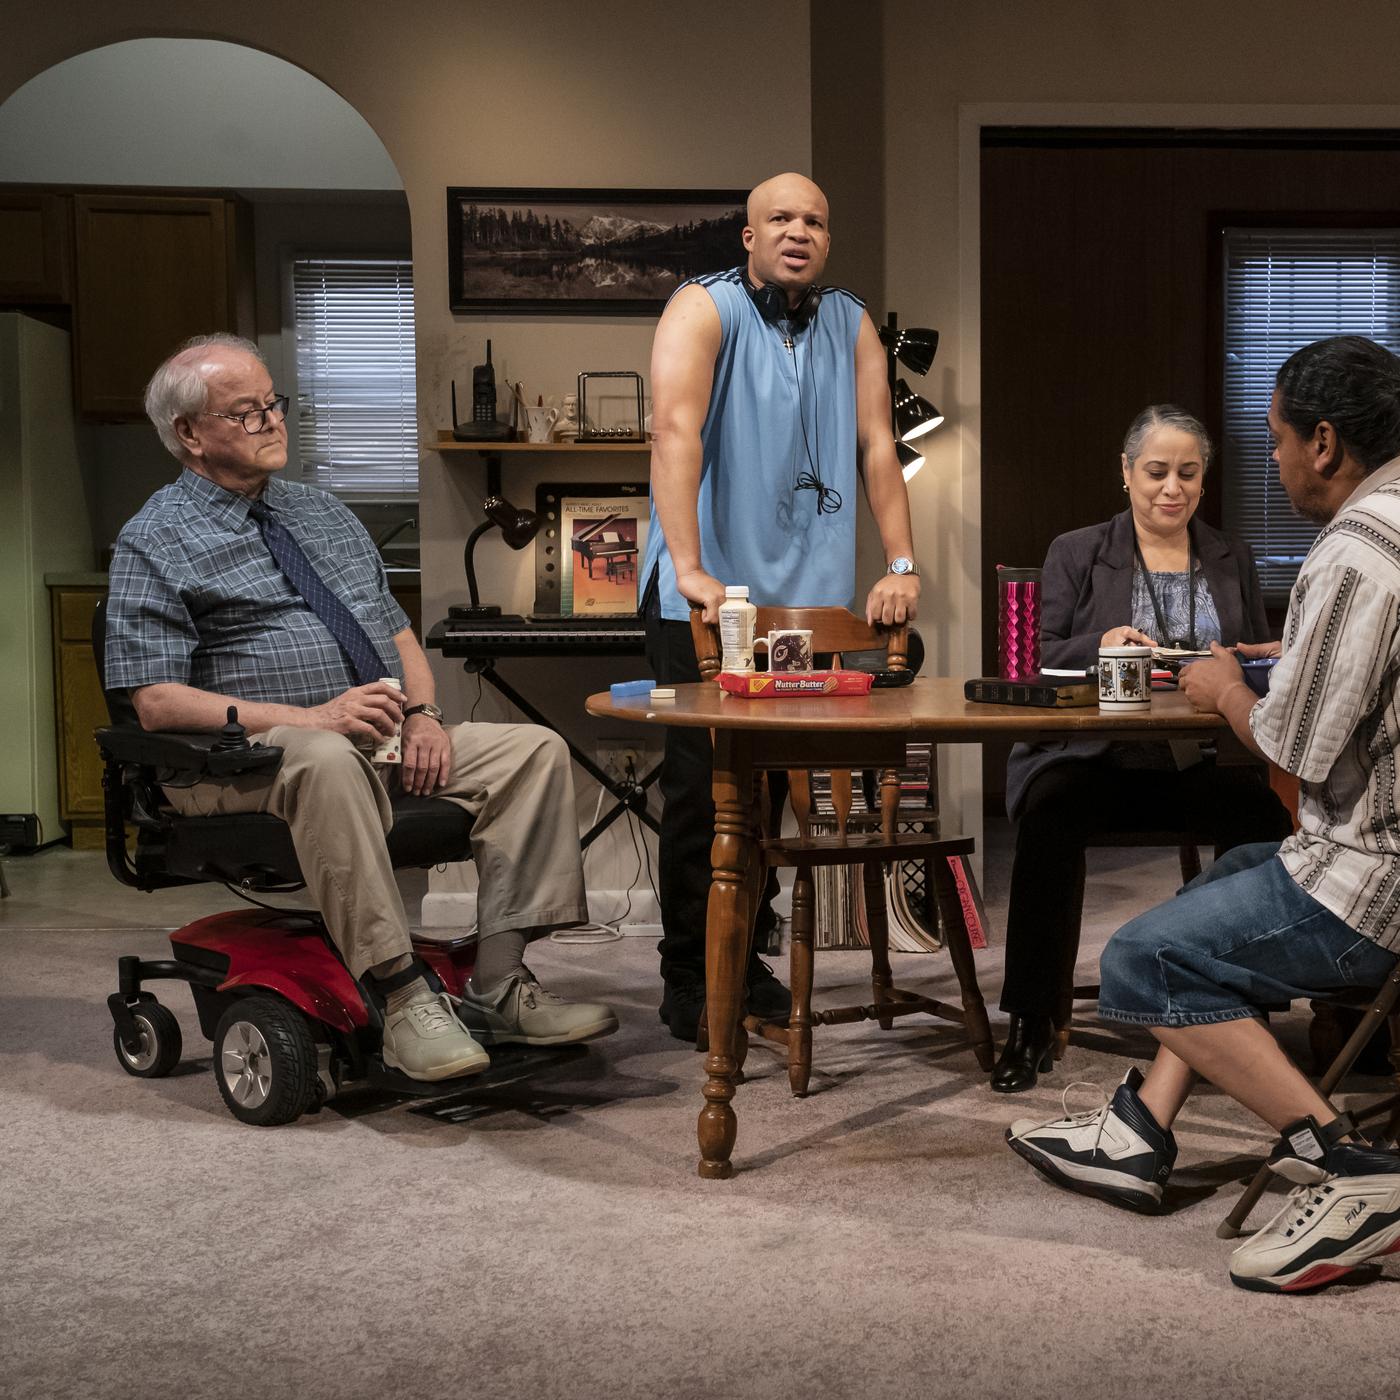 Playwrights Horizons' "Downstate" Dives into Difficult Conversations